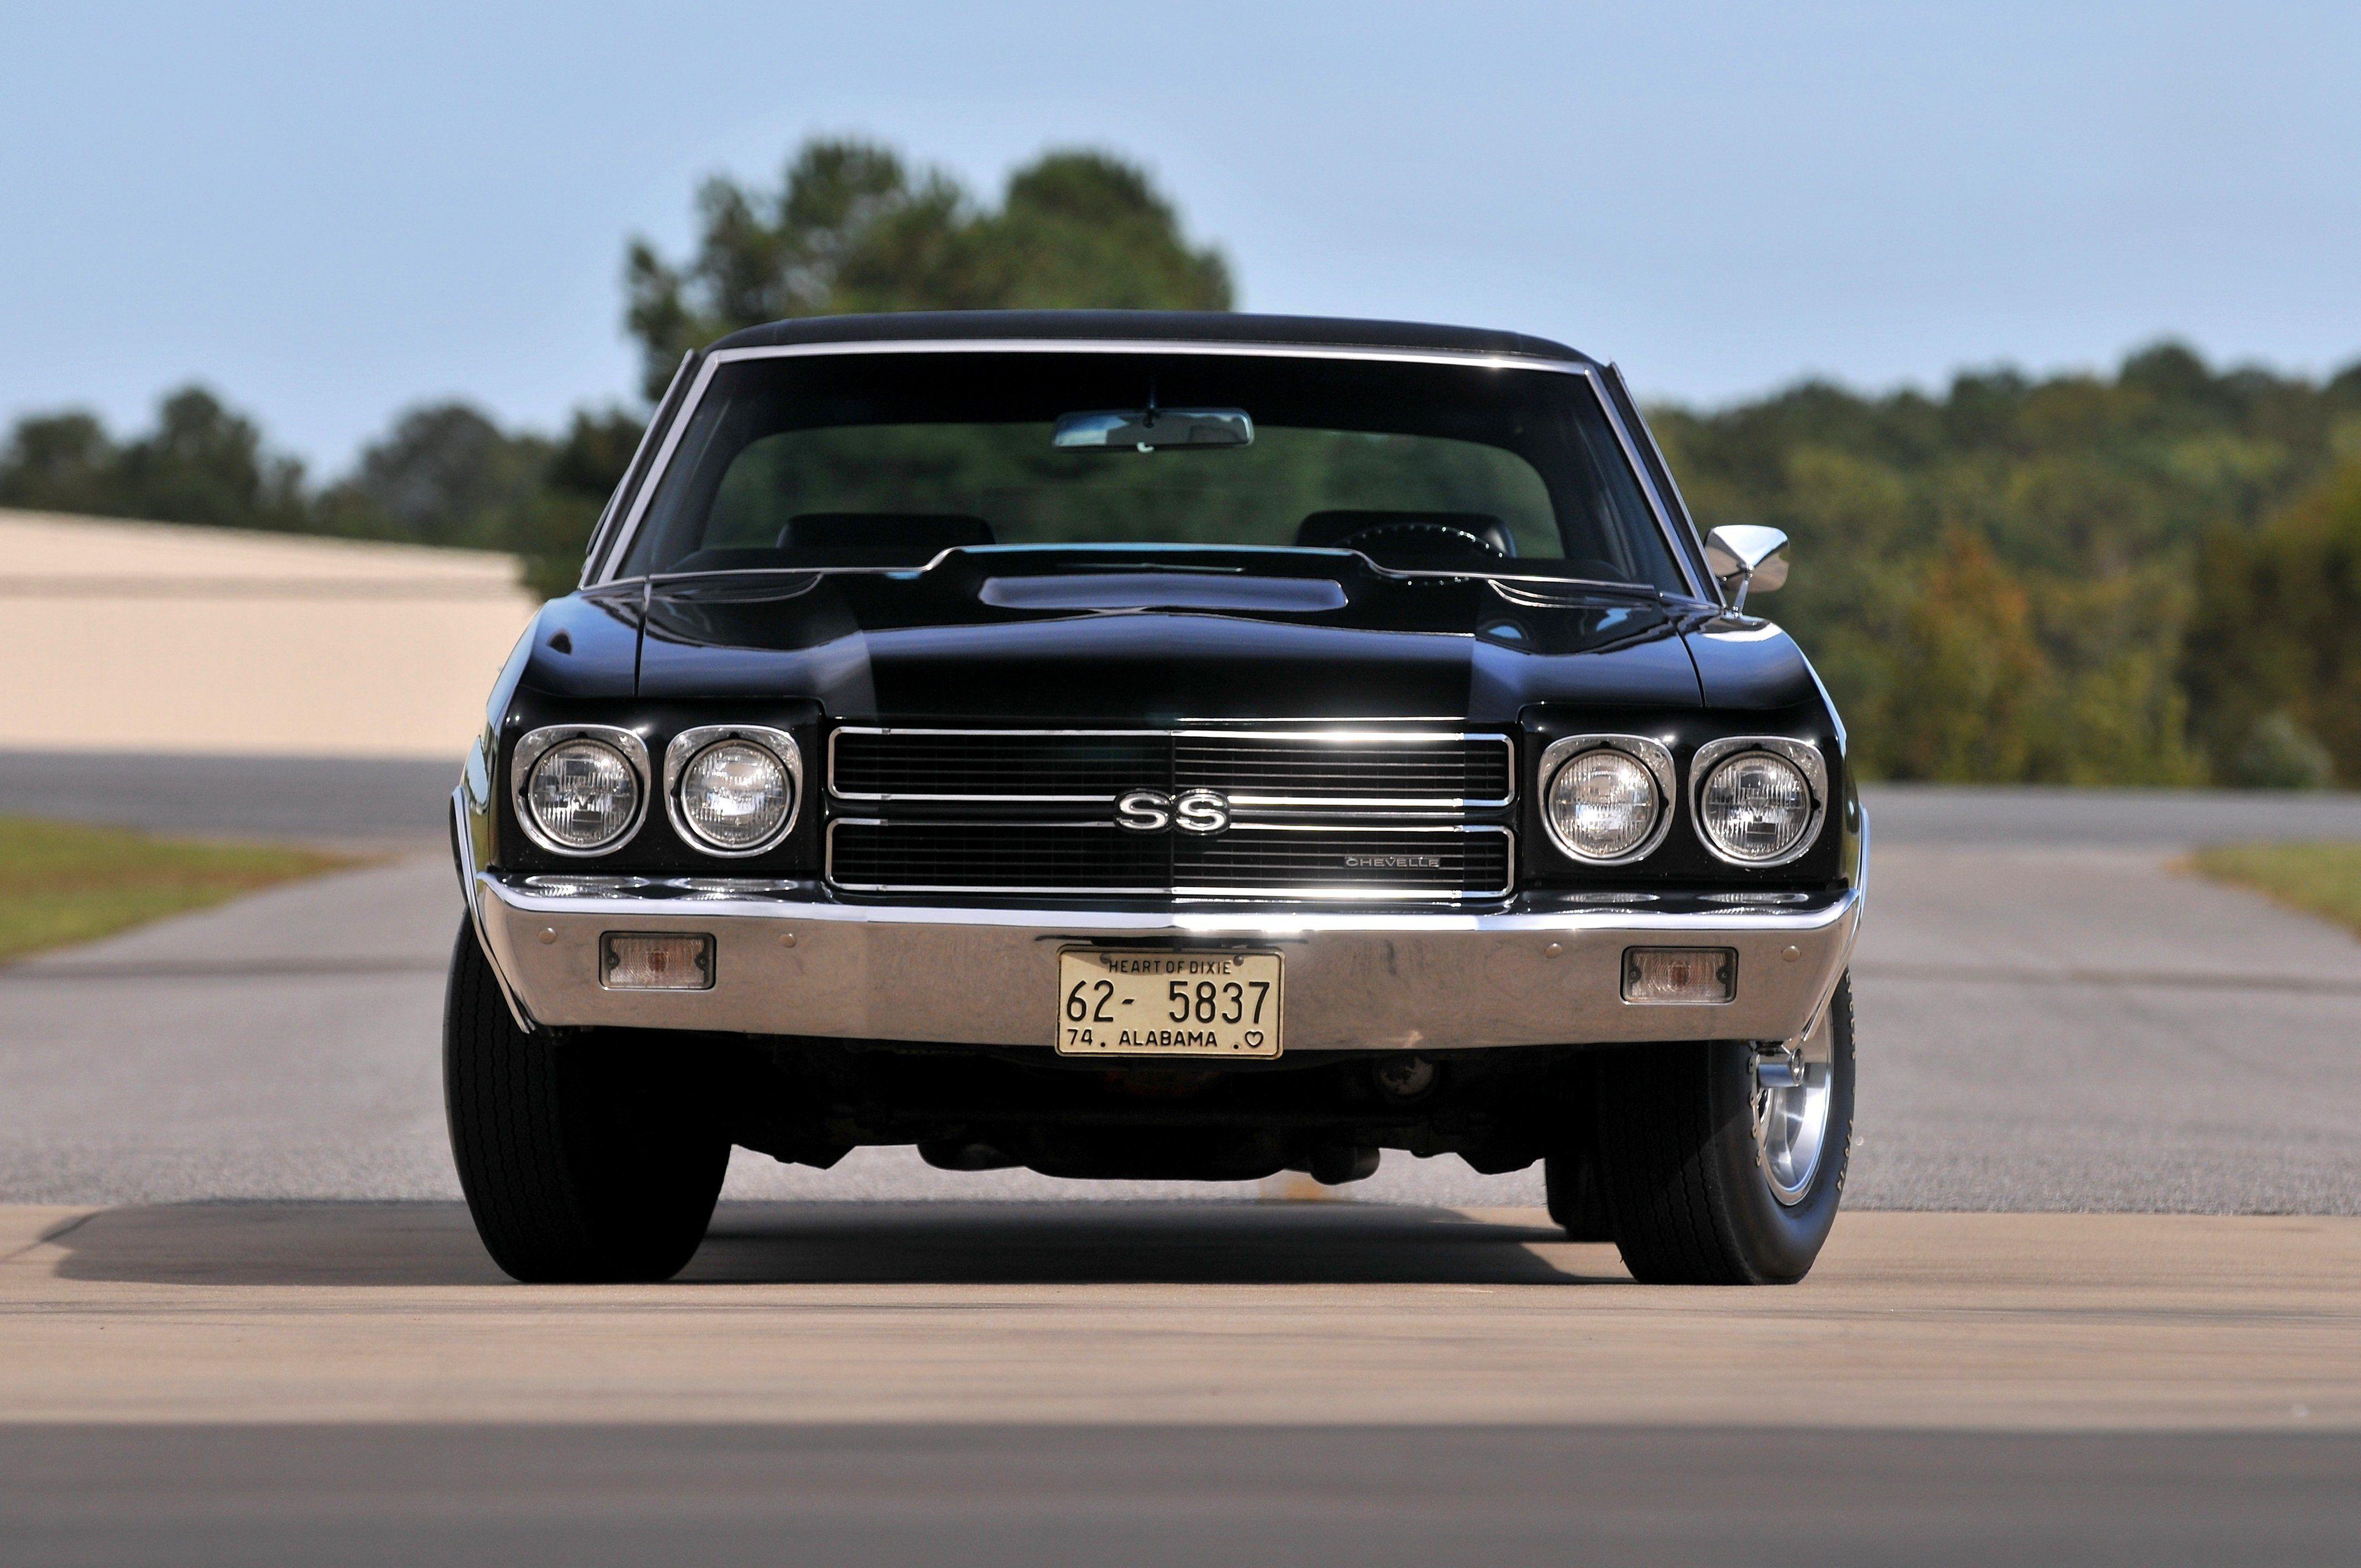 Chevrolet Chevelle S S 454 LS6 Hardtop Coupe Muscle Classic